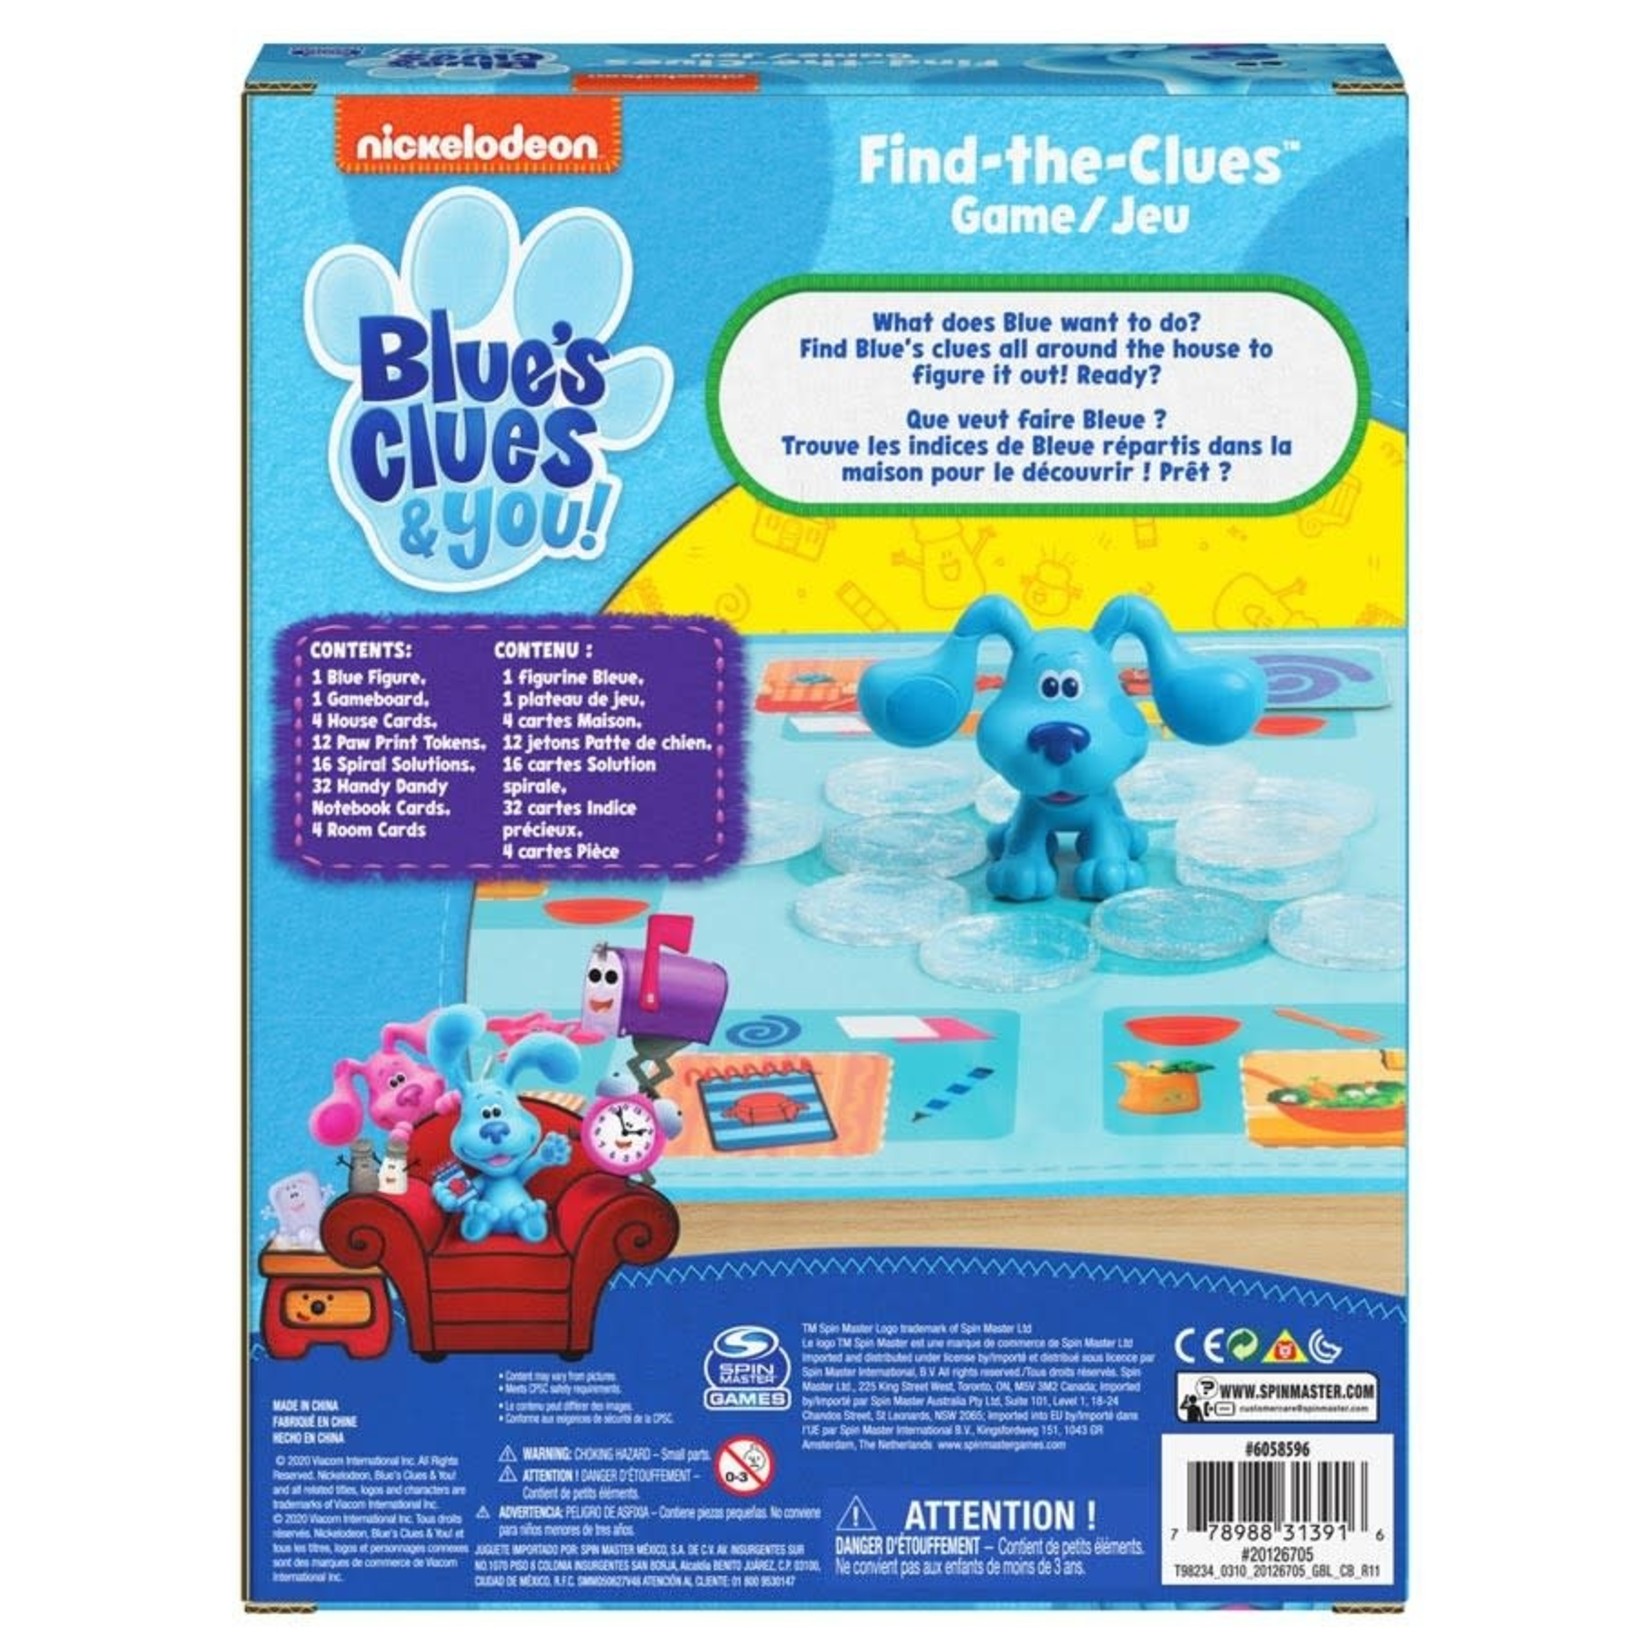 Blue's Clues & You! Find-The-Clues